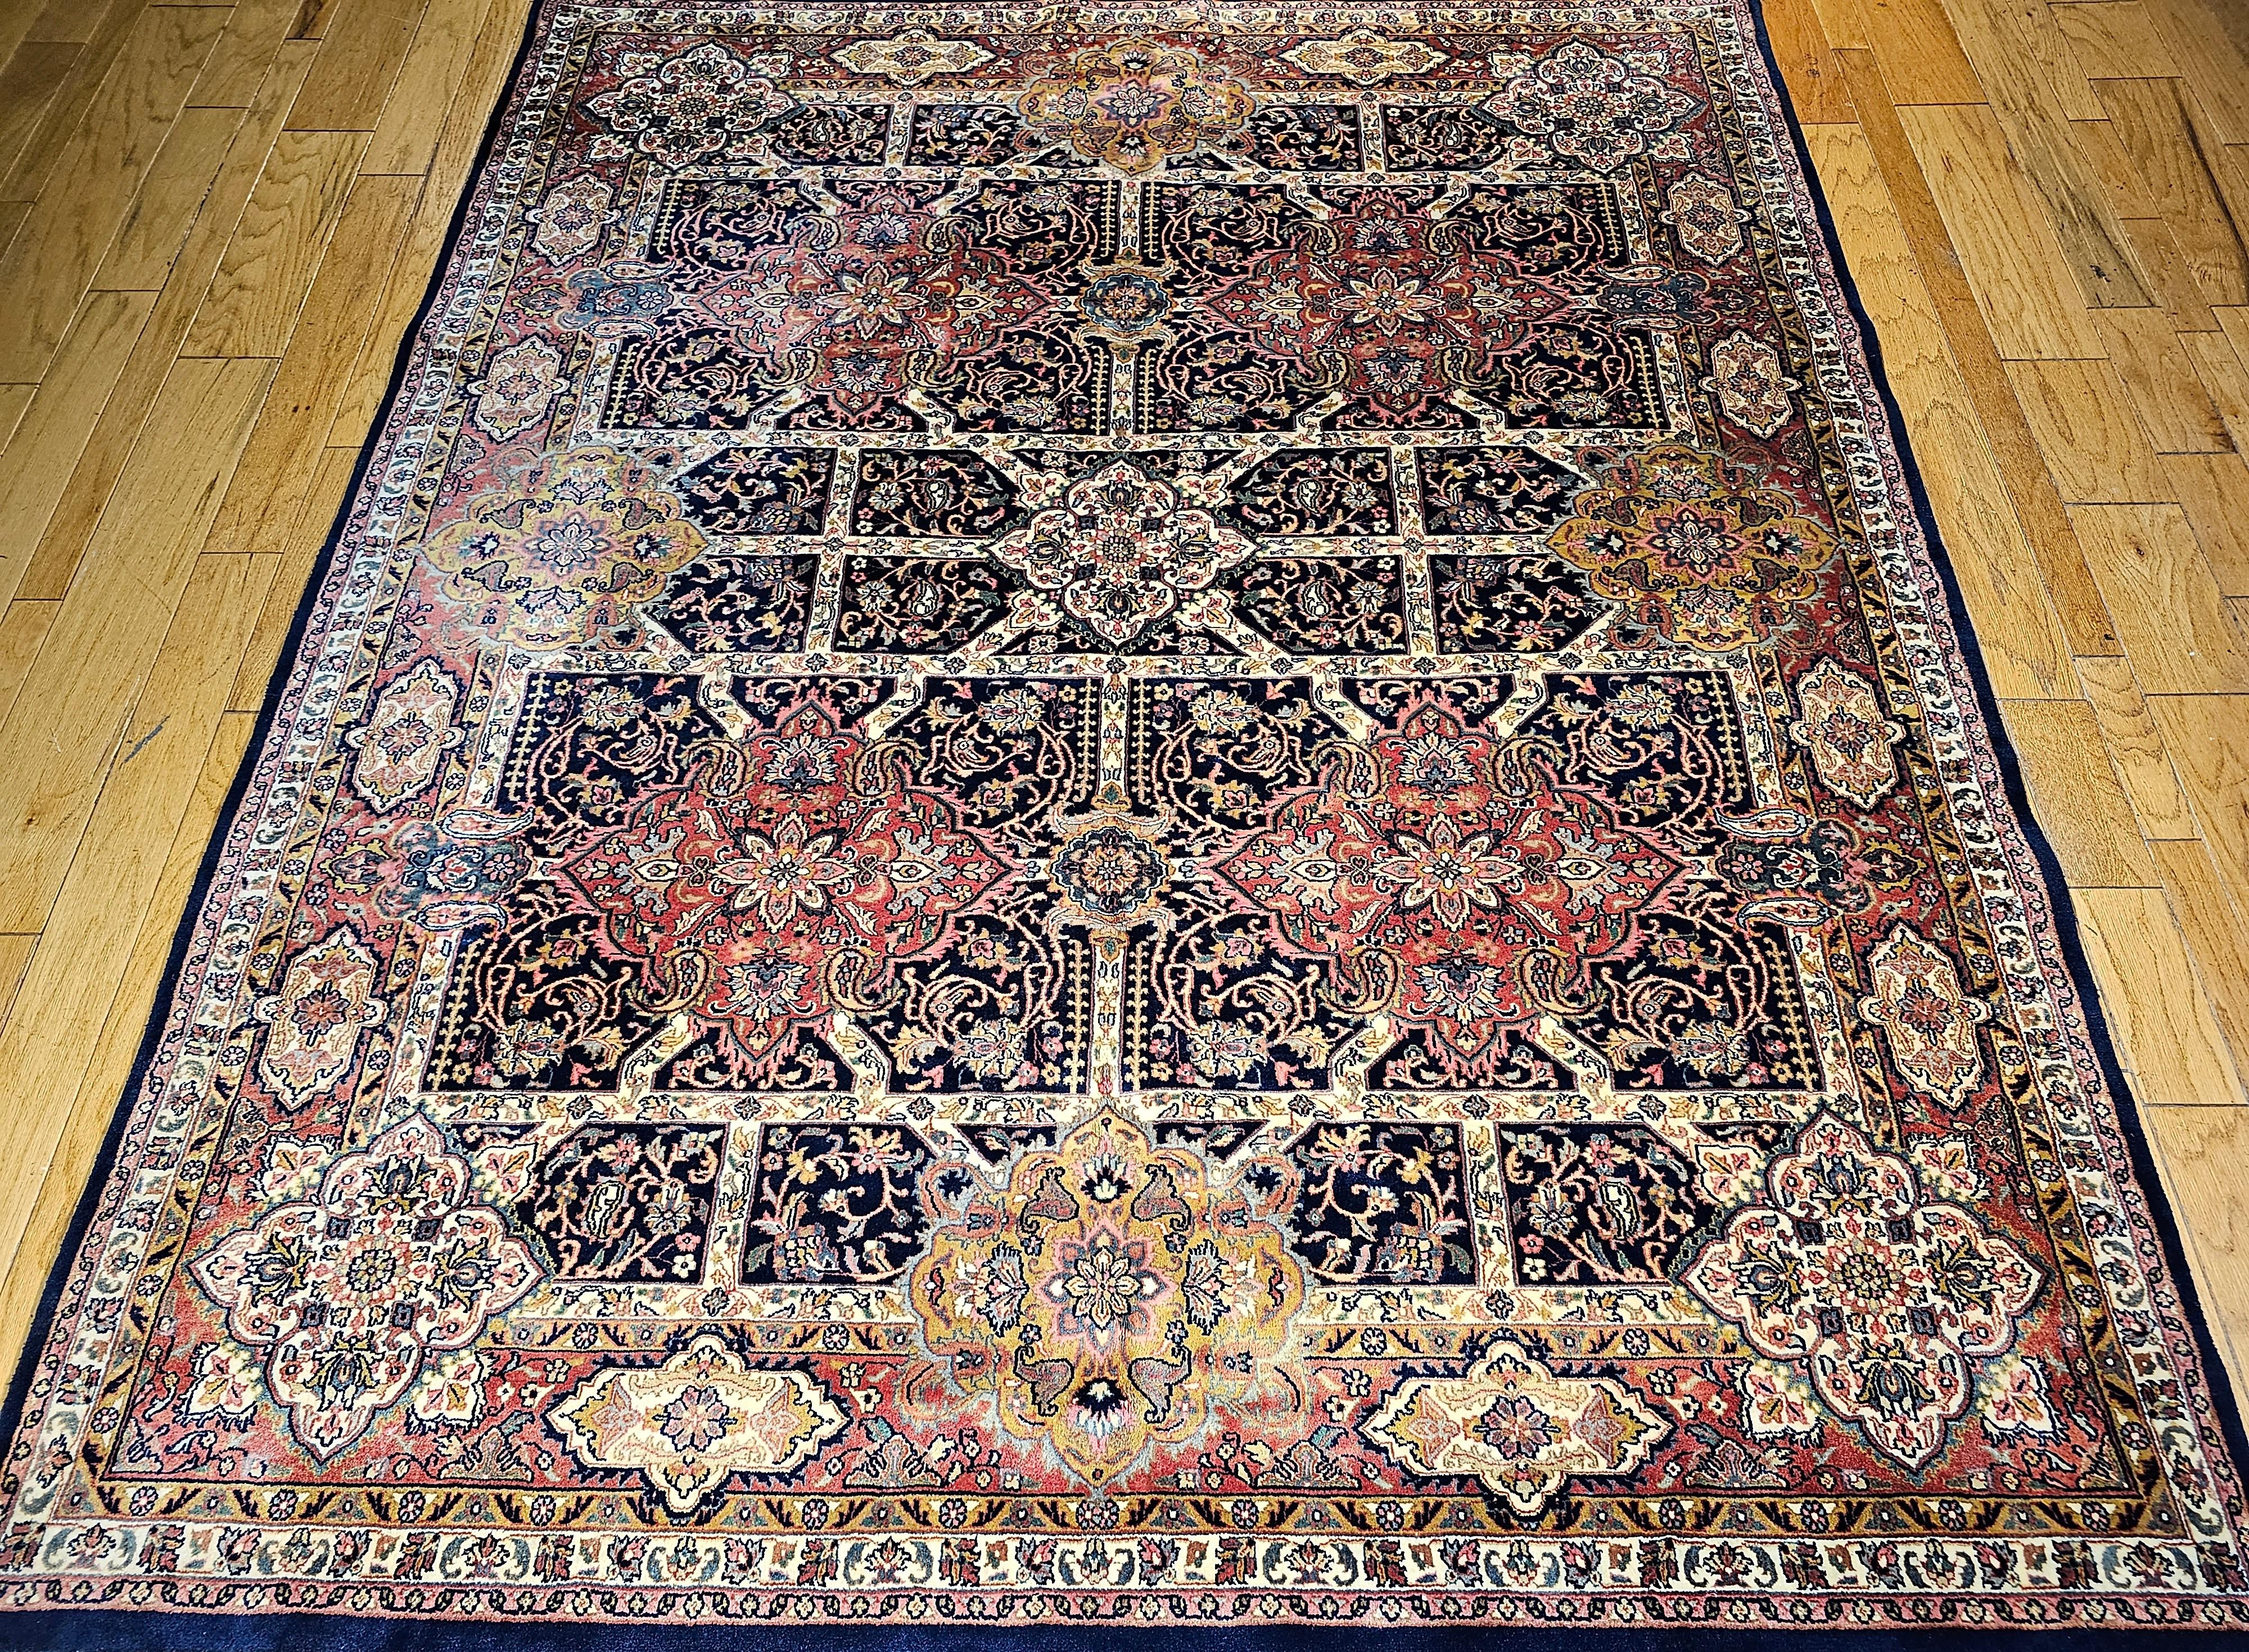 Vintage Kerman style room size rug from the late 20th century.  The rug has a beautiful all-over large format geometric design pattern similar to the Persian Kerman rugs from the 19th century. The background color is dark navy blue/black with